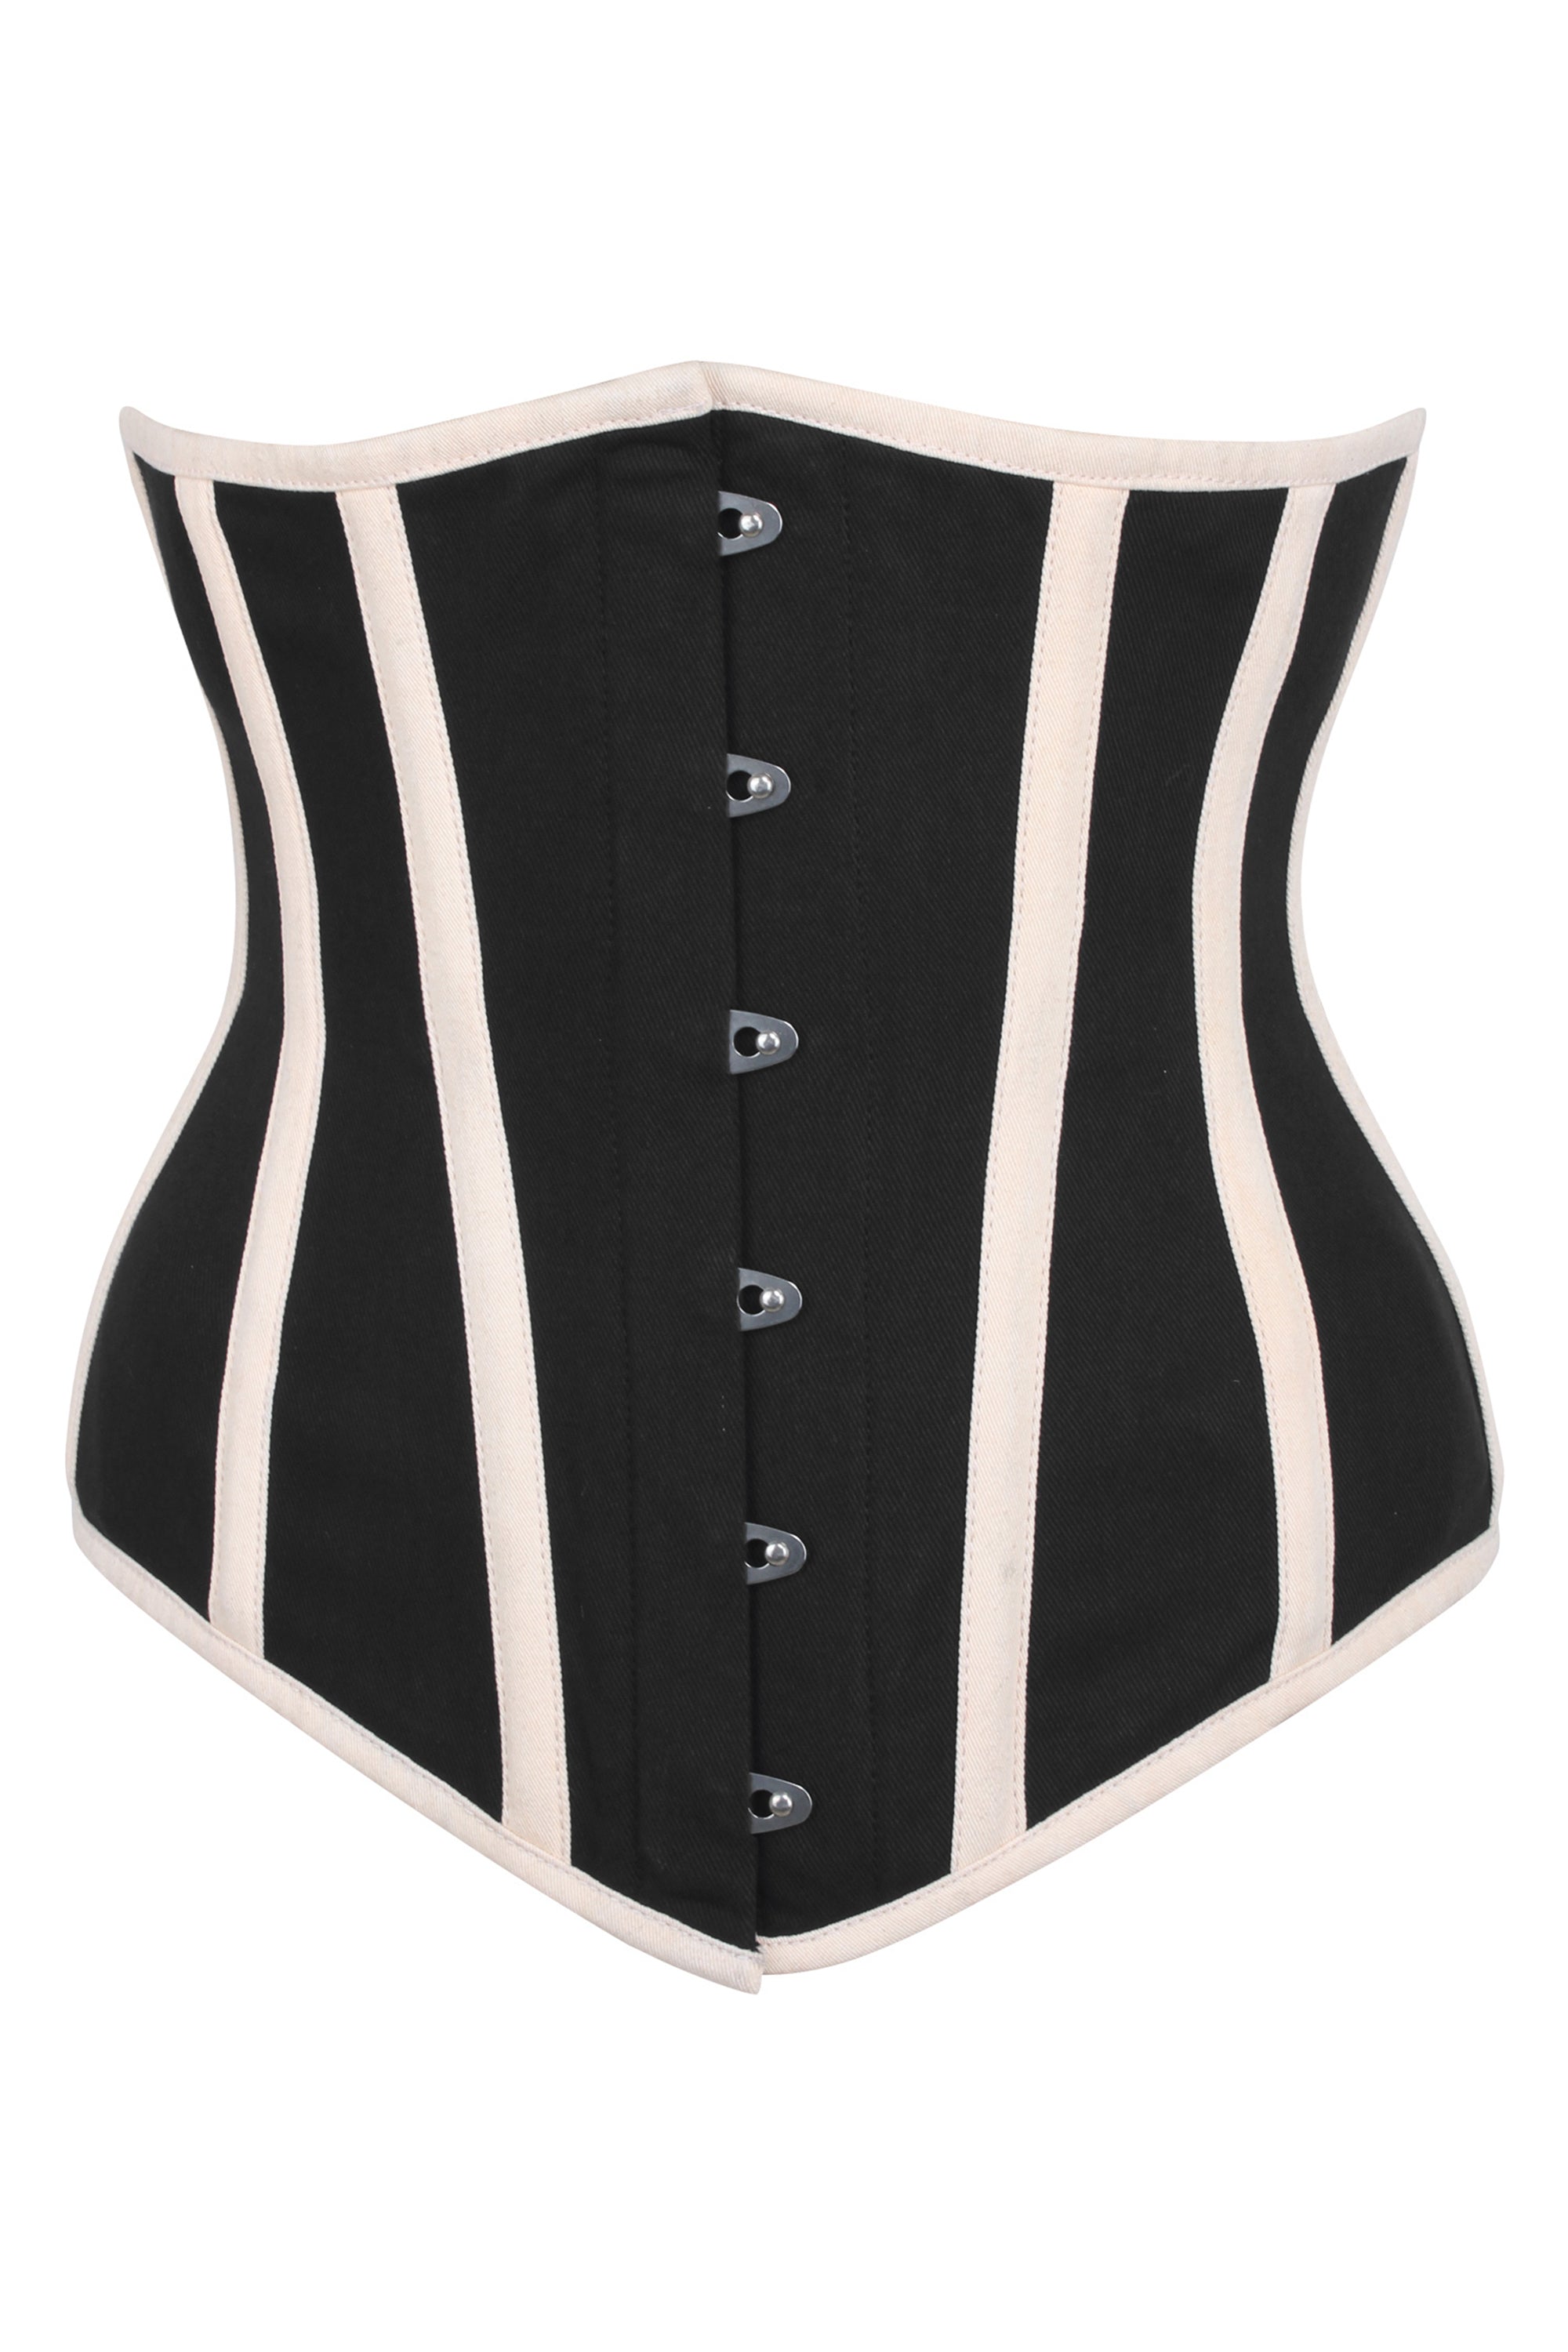 Black Couture Underbust Corset Waspie by Corset Story -  Canada